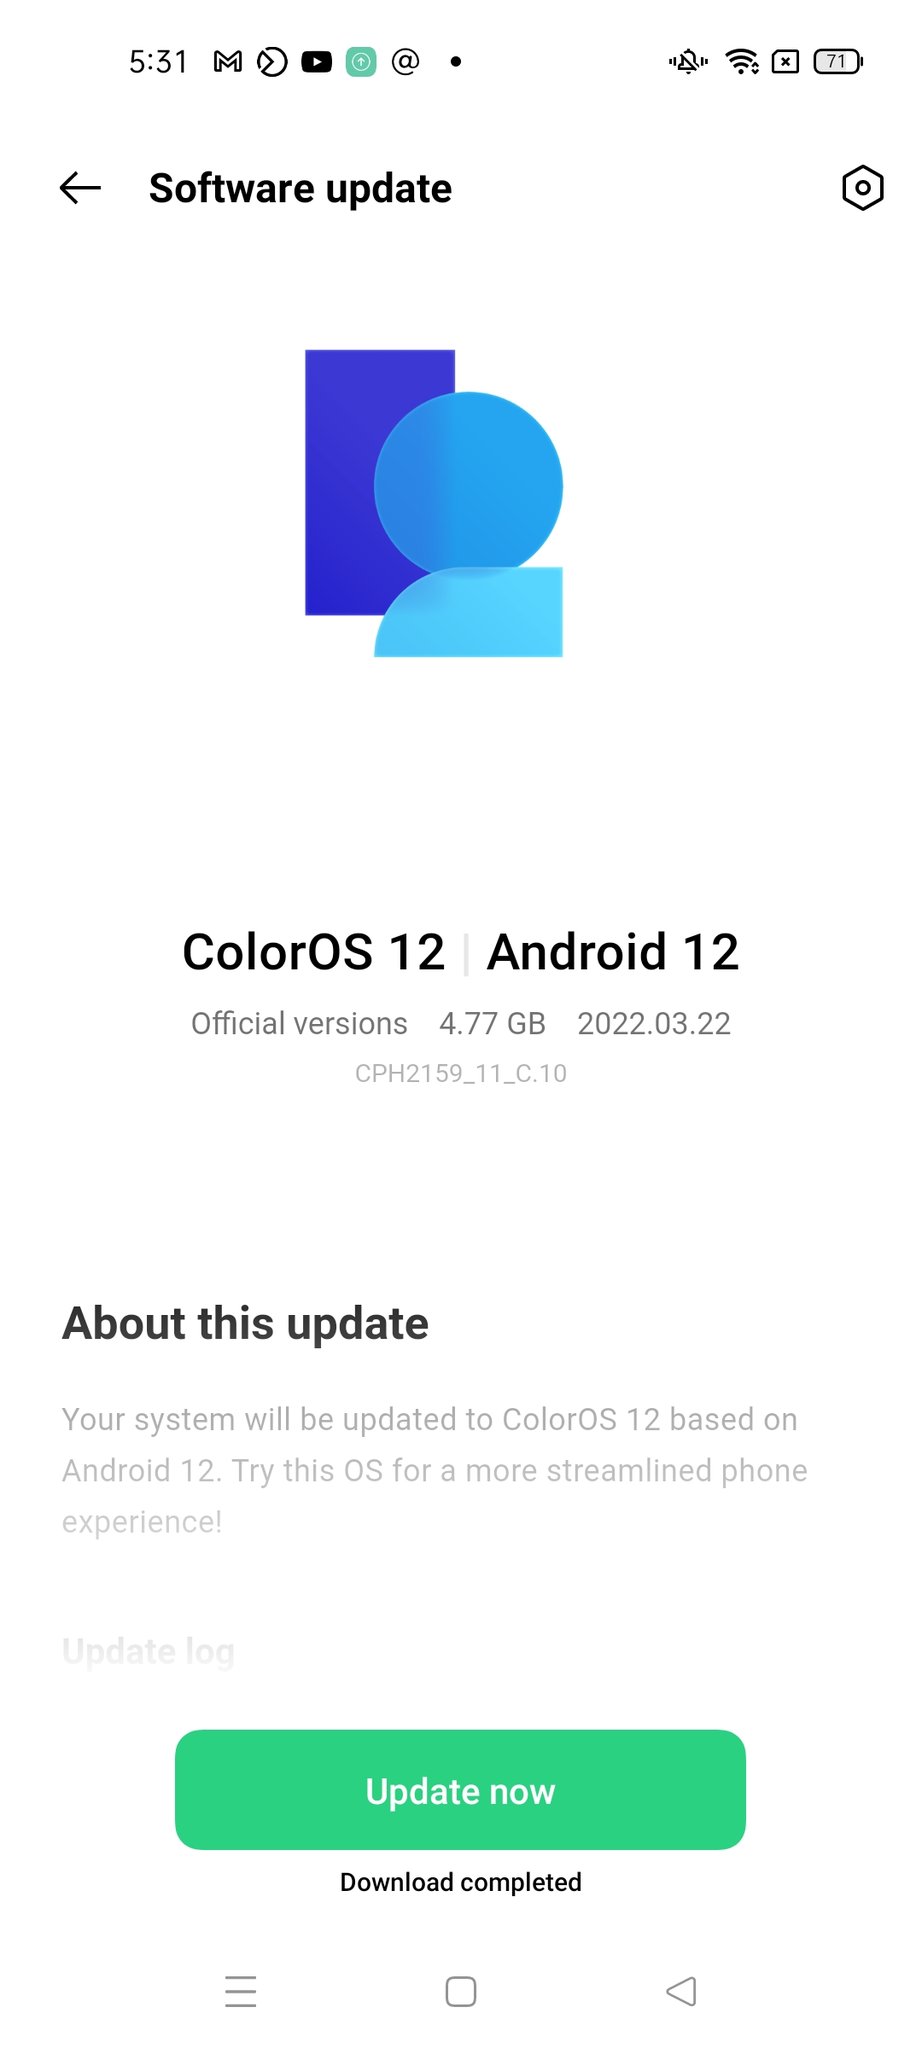 OPPO Reno5 bags Android 12 update with ColorOS 12 in Kenya | DroidAfrica